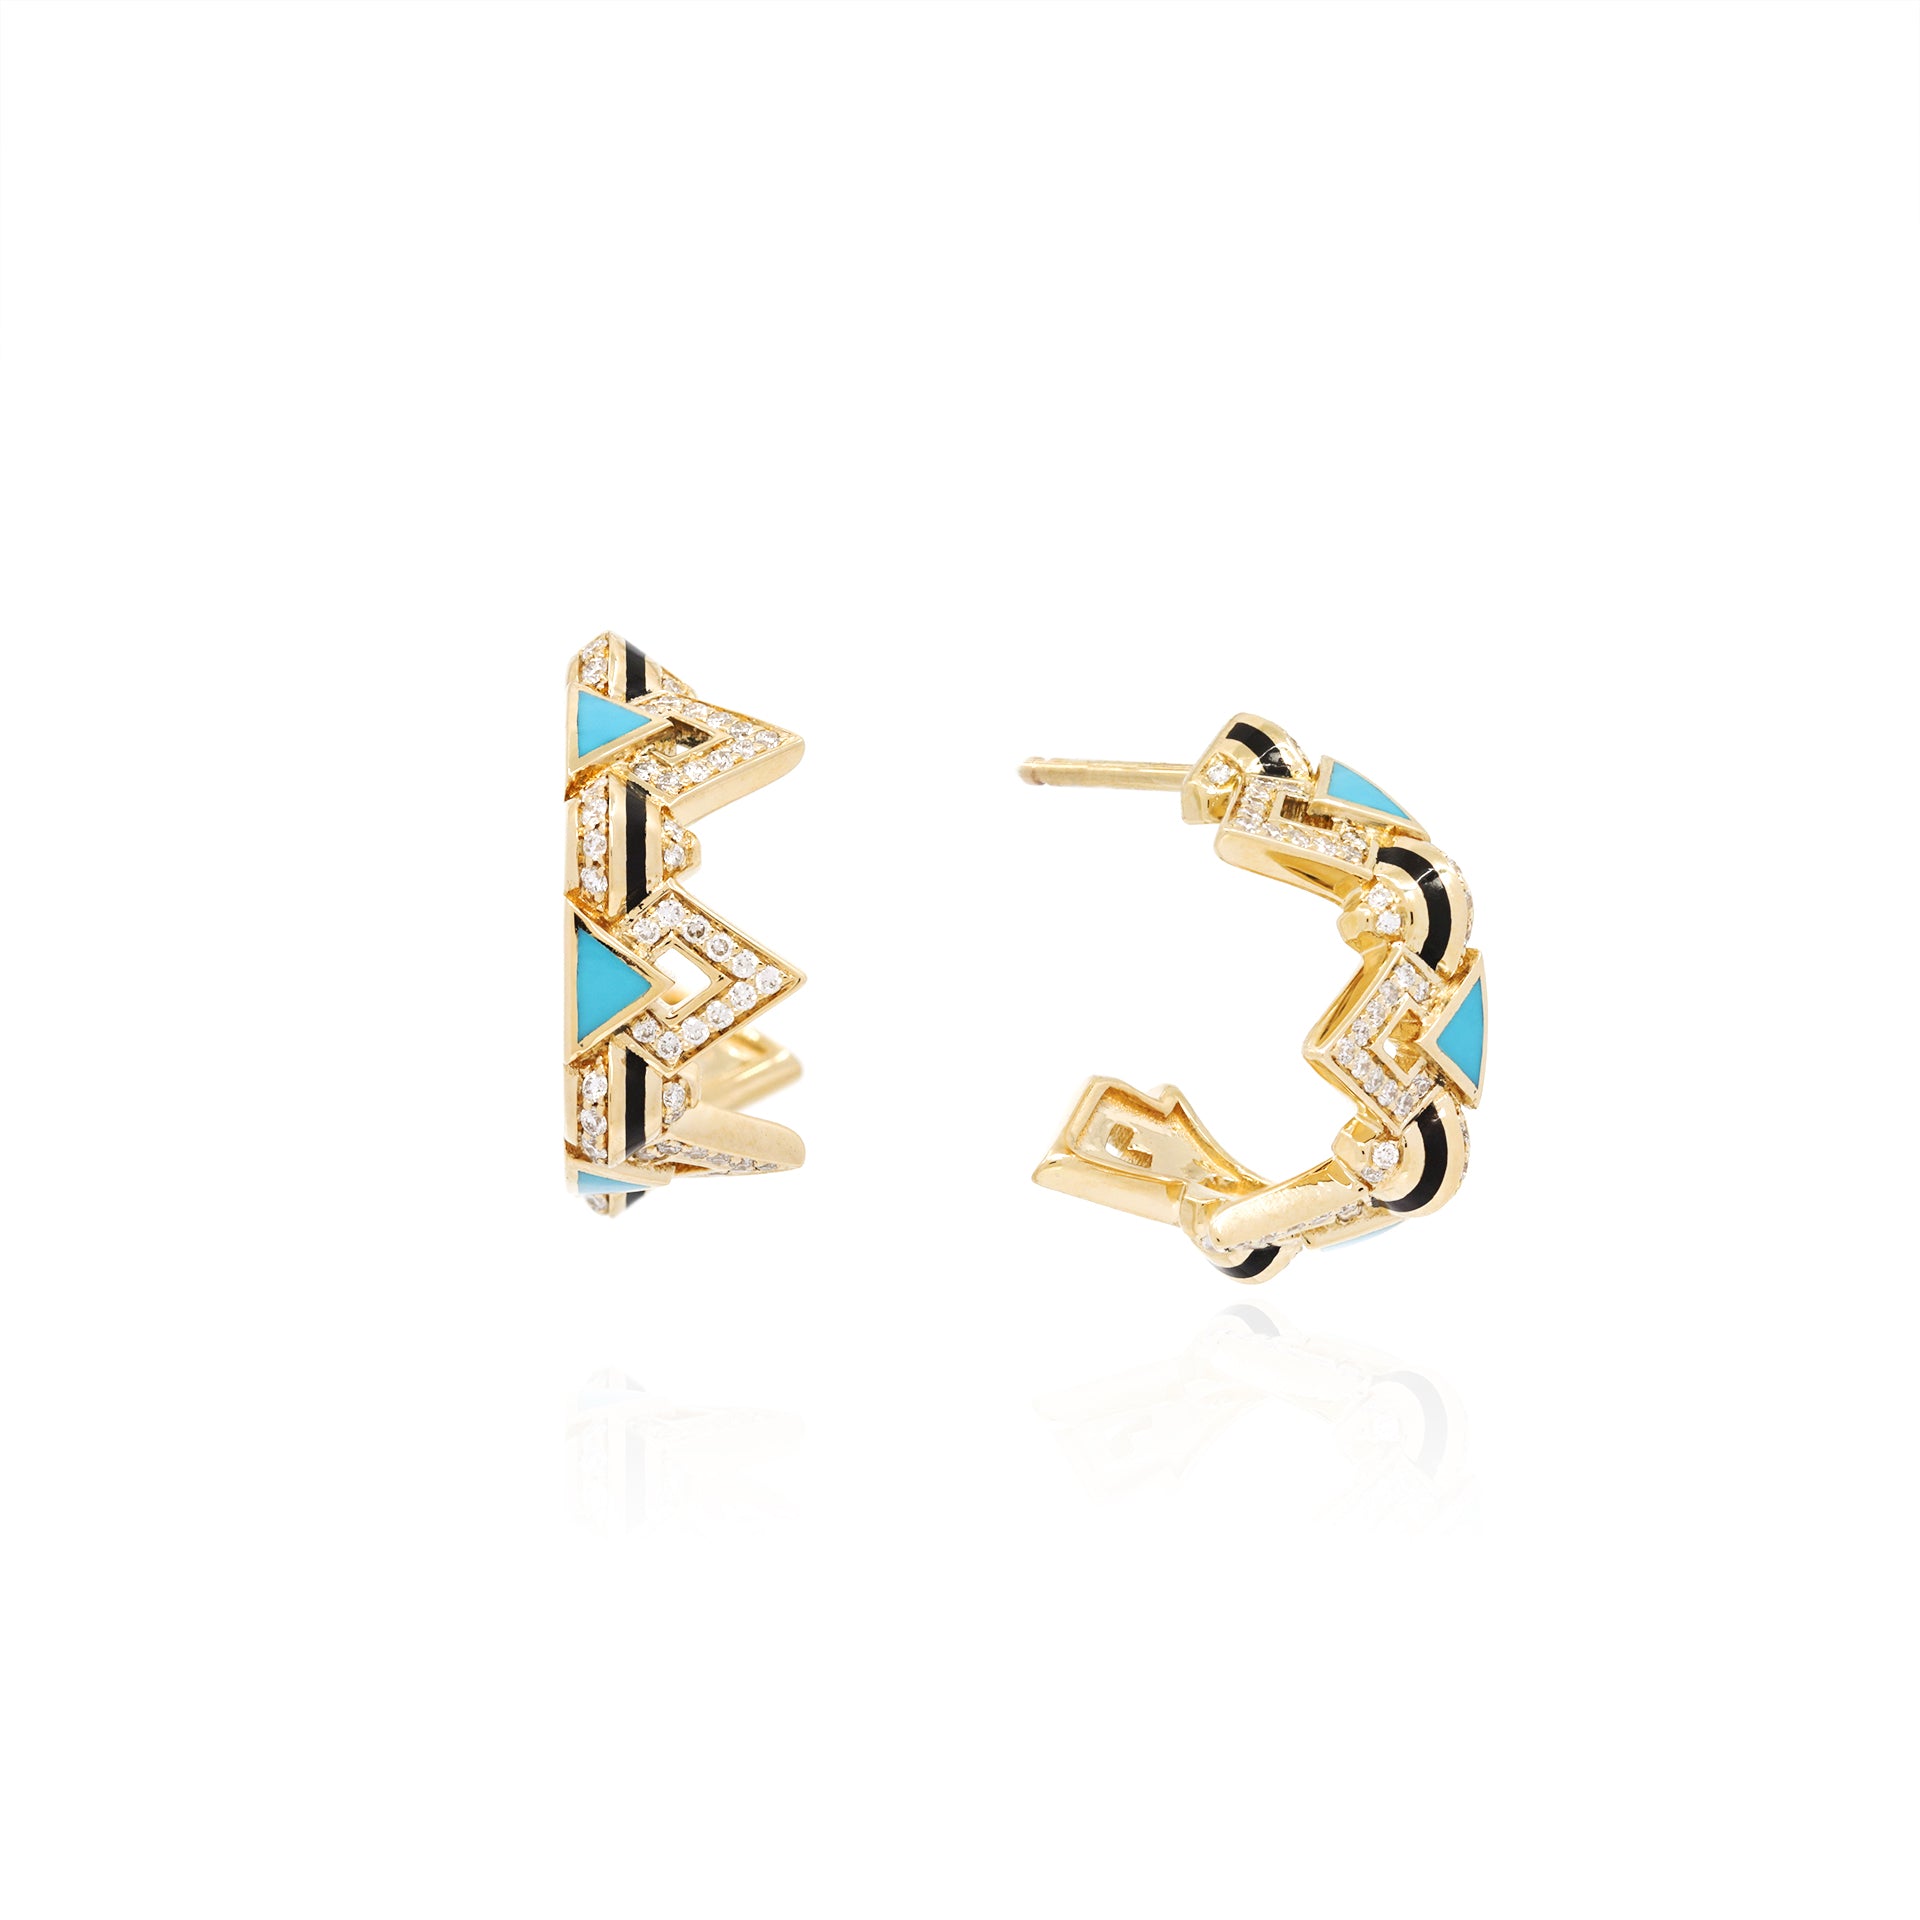 18k Yellow Gold Hoop Small Earrings with Black & Turquoise Hyceram and Diamonds